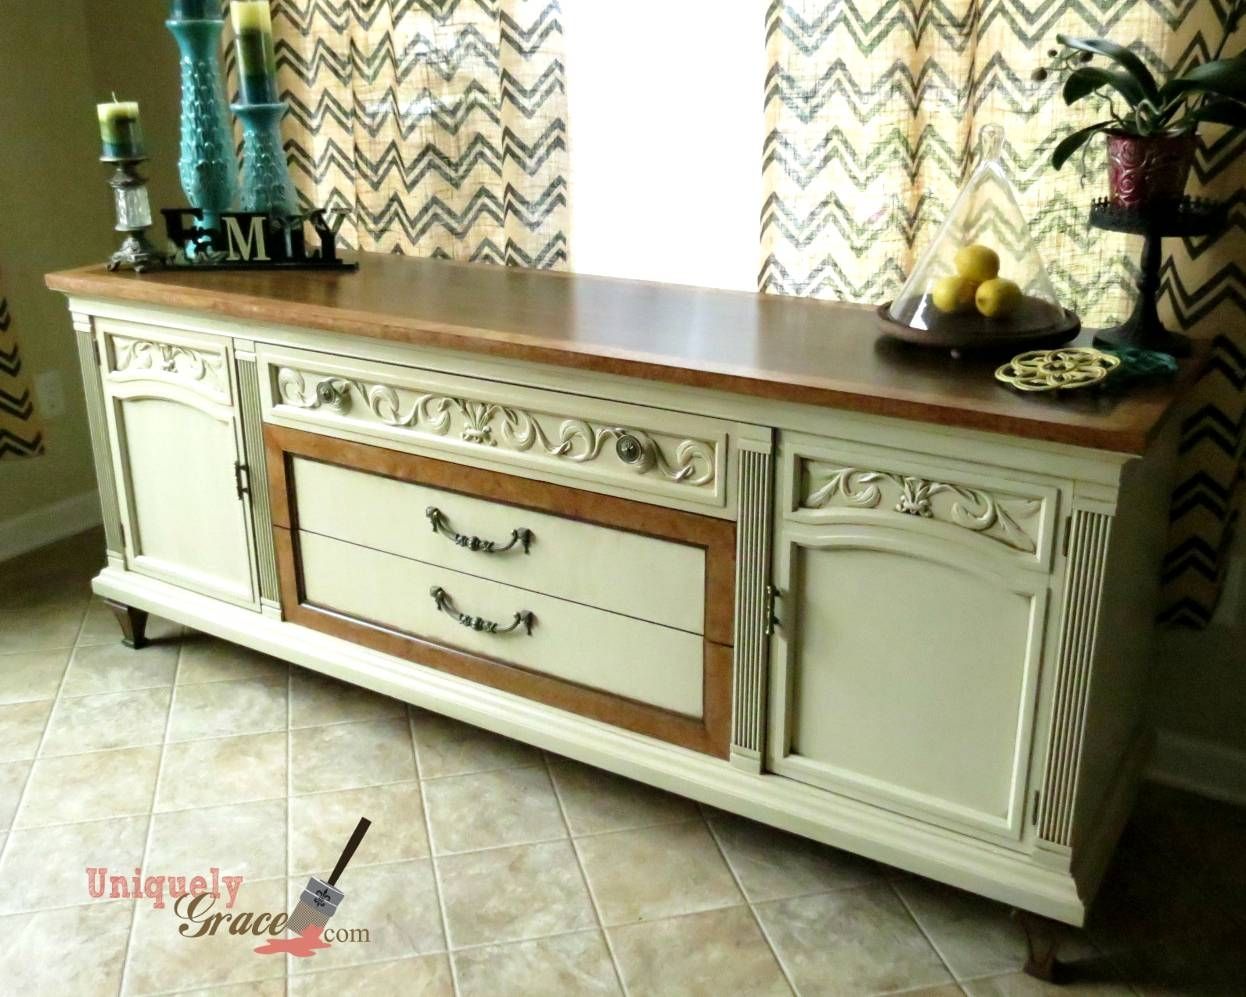 Vintage Drexel Buffet Sideboard 80" – Nadette With Regard To 80 Inch Sideboard (View 14 of 20)